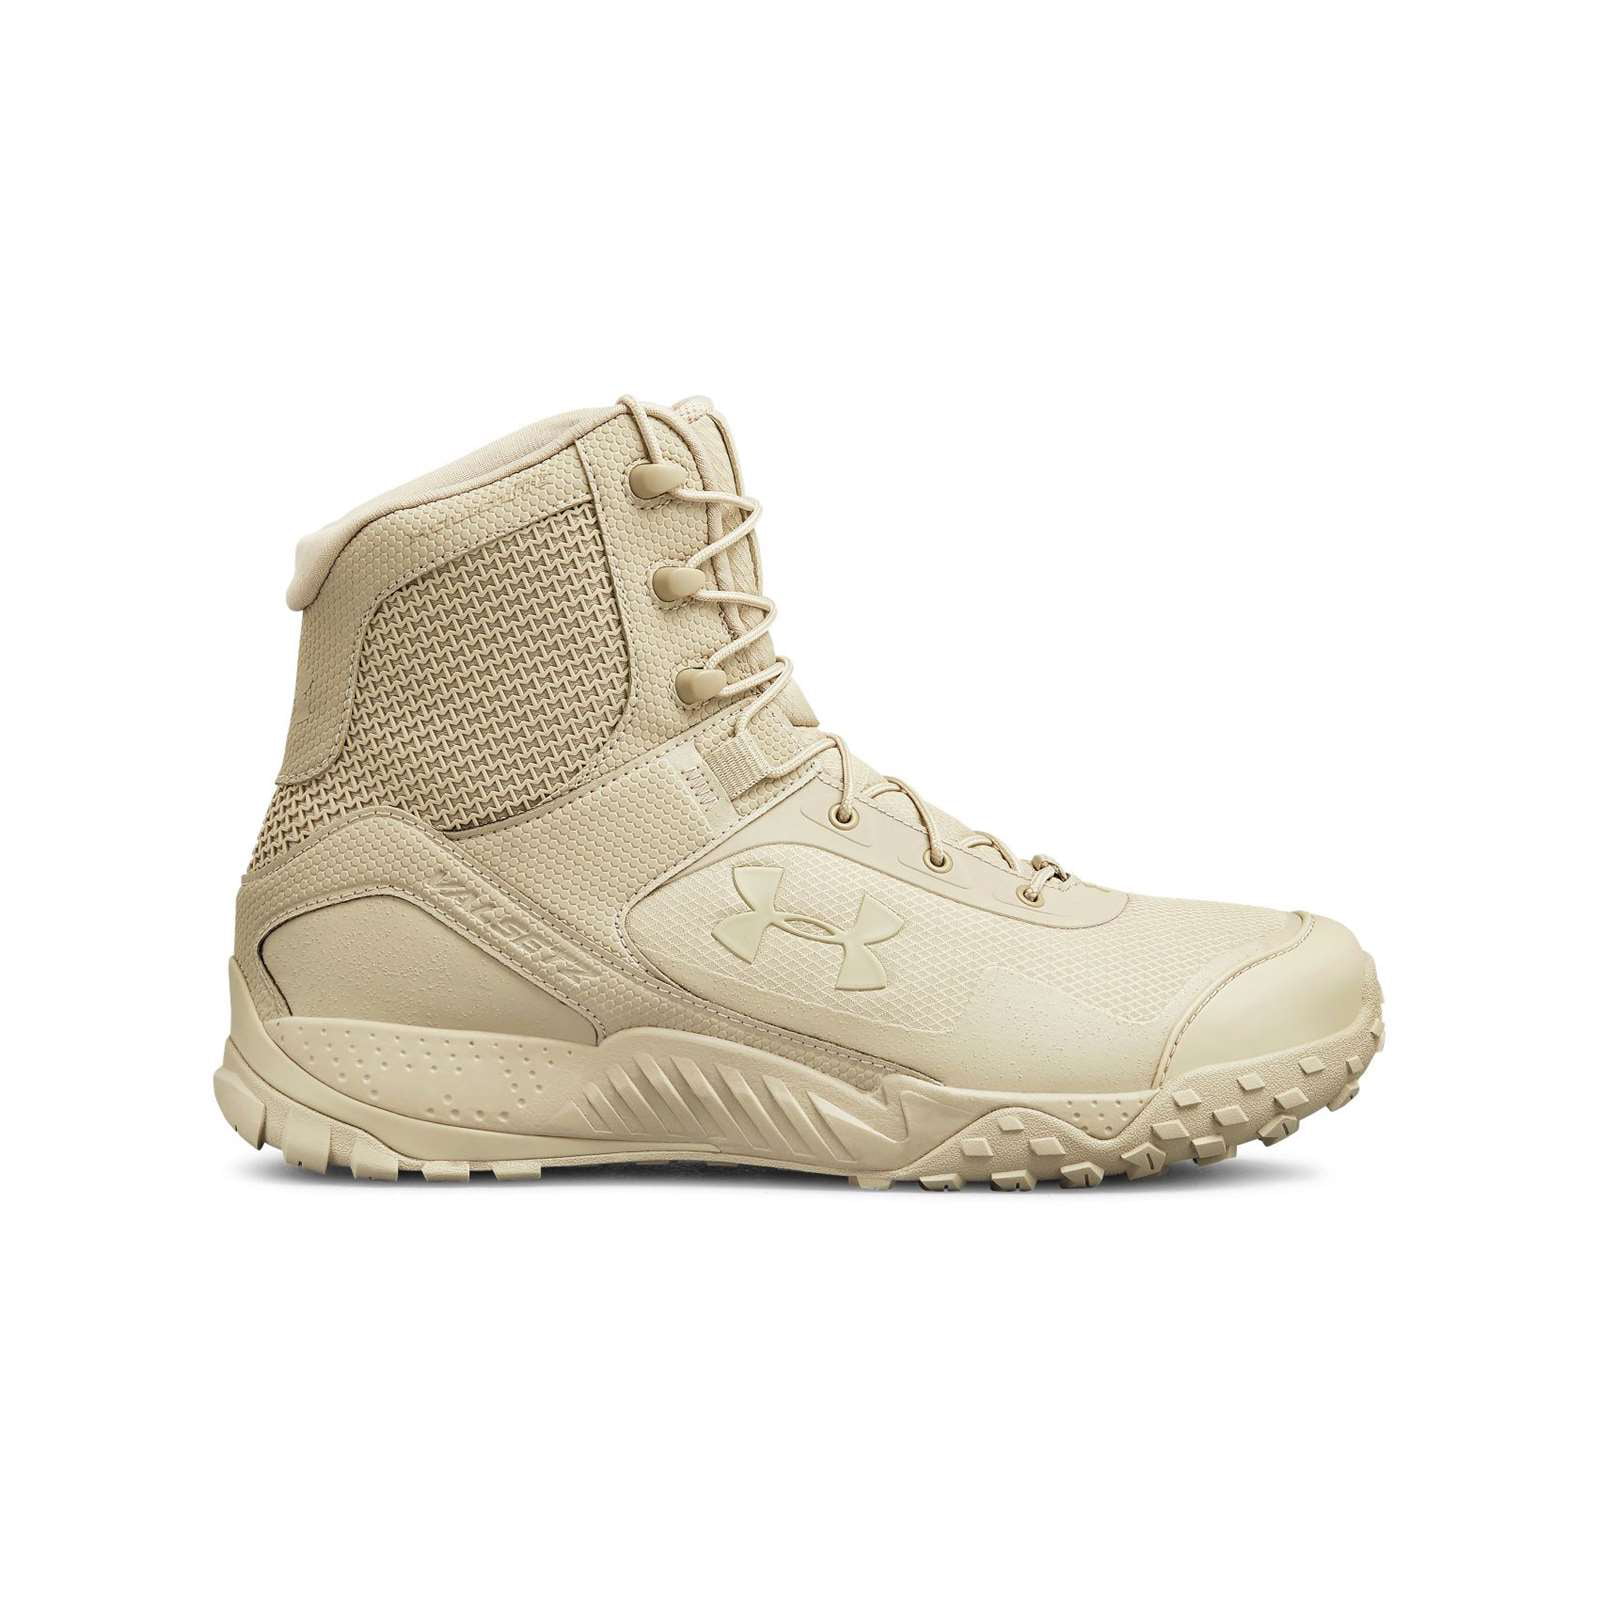 under armour tactical work boots